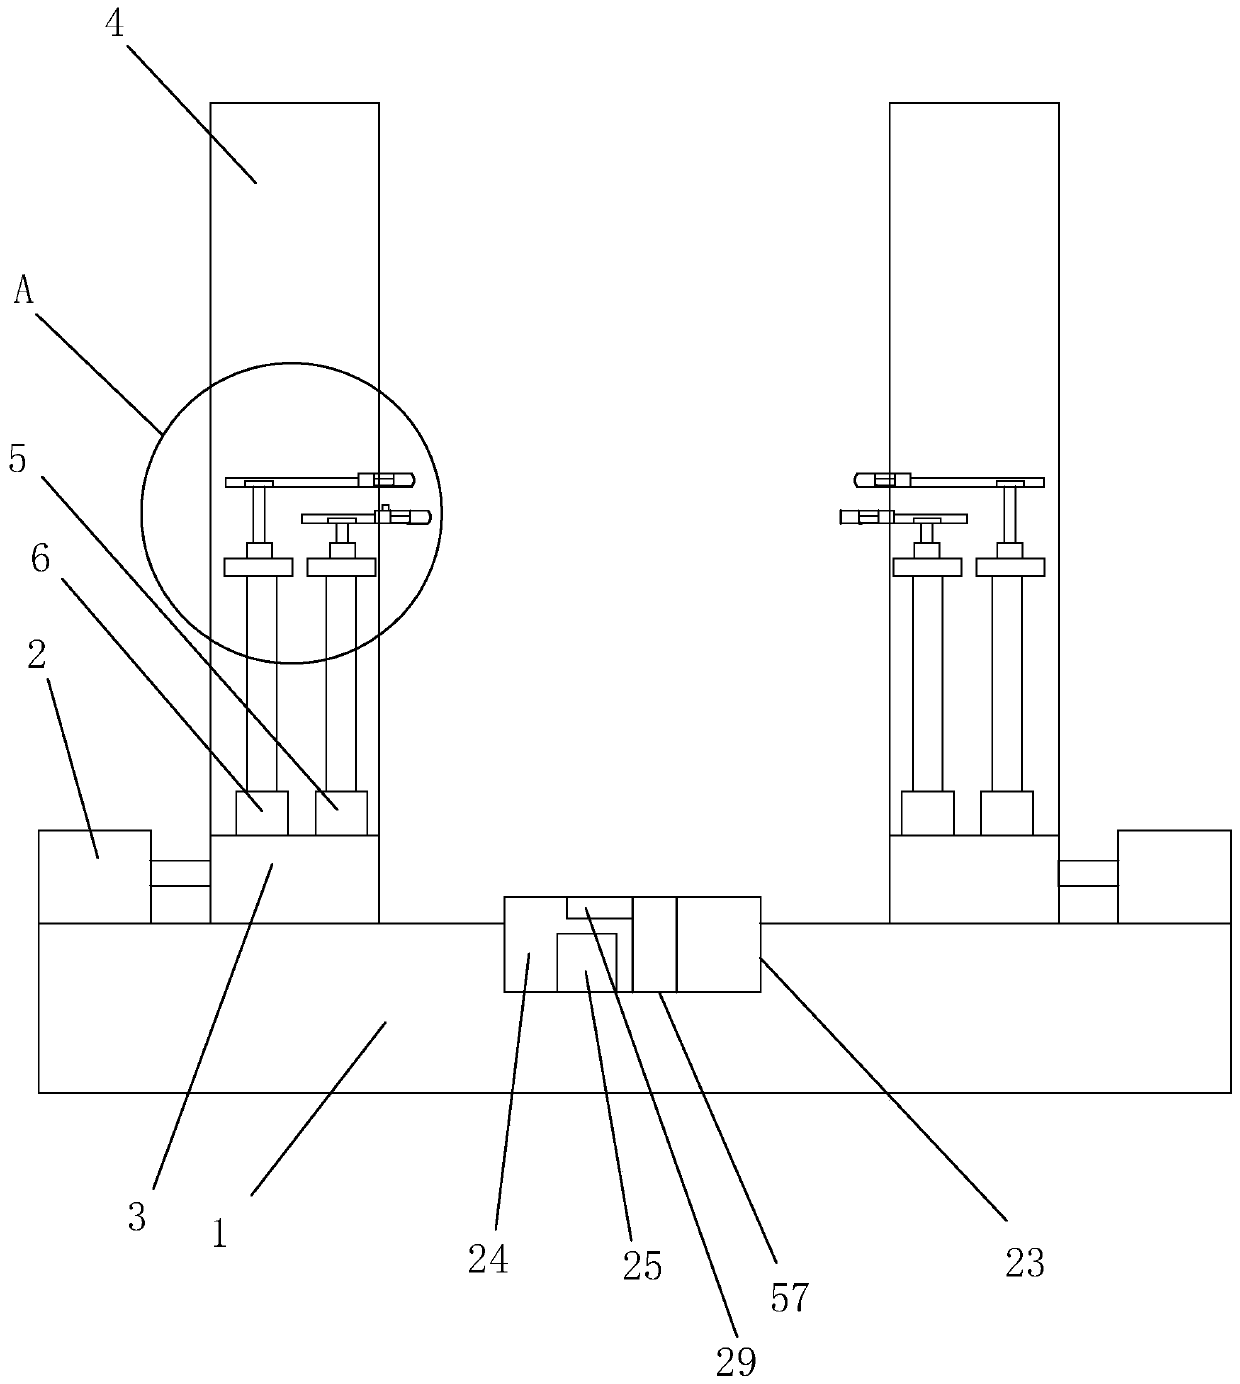 High-efficiency flanging machine device for producing and manufacturing shoes